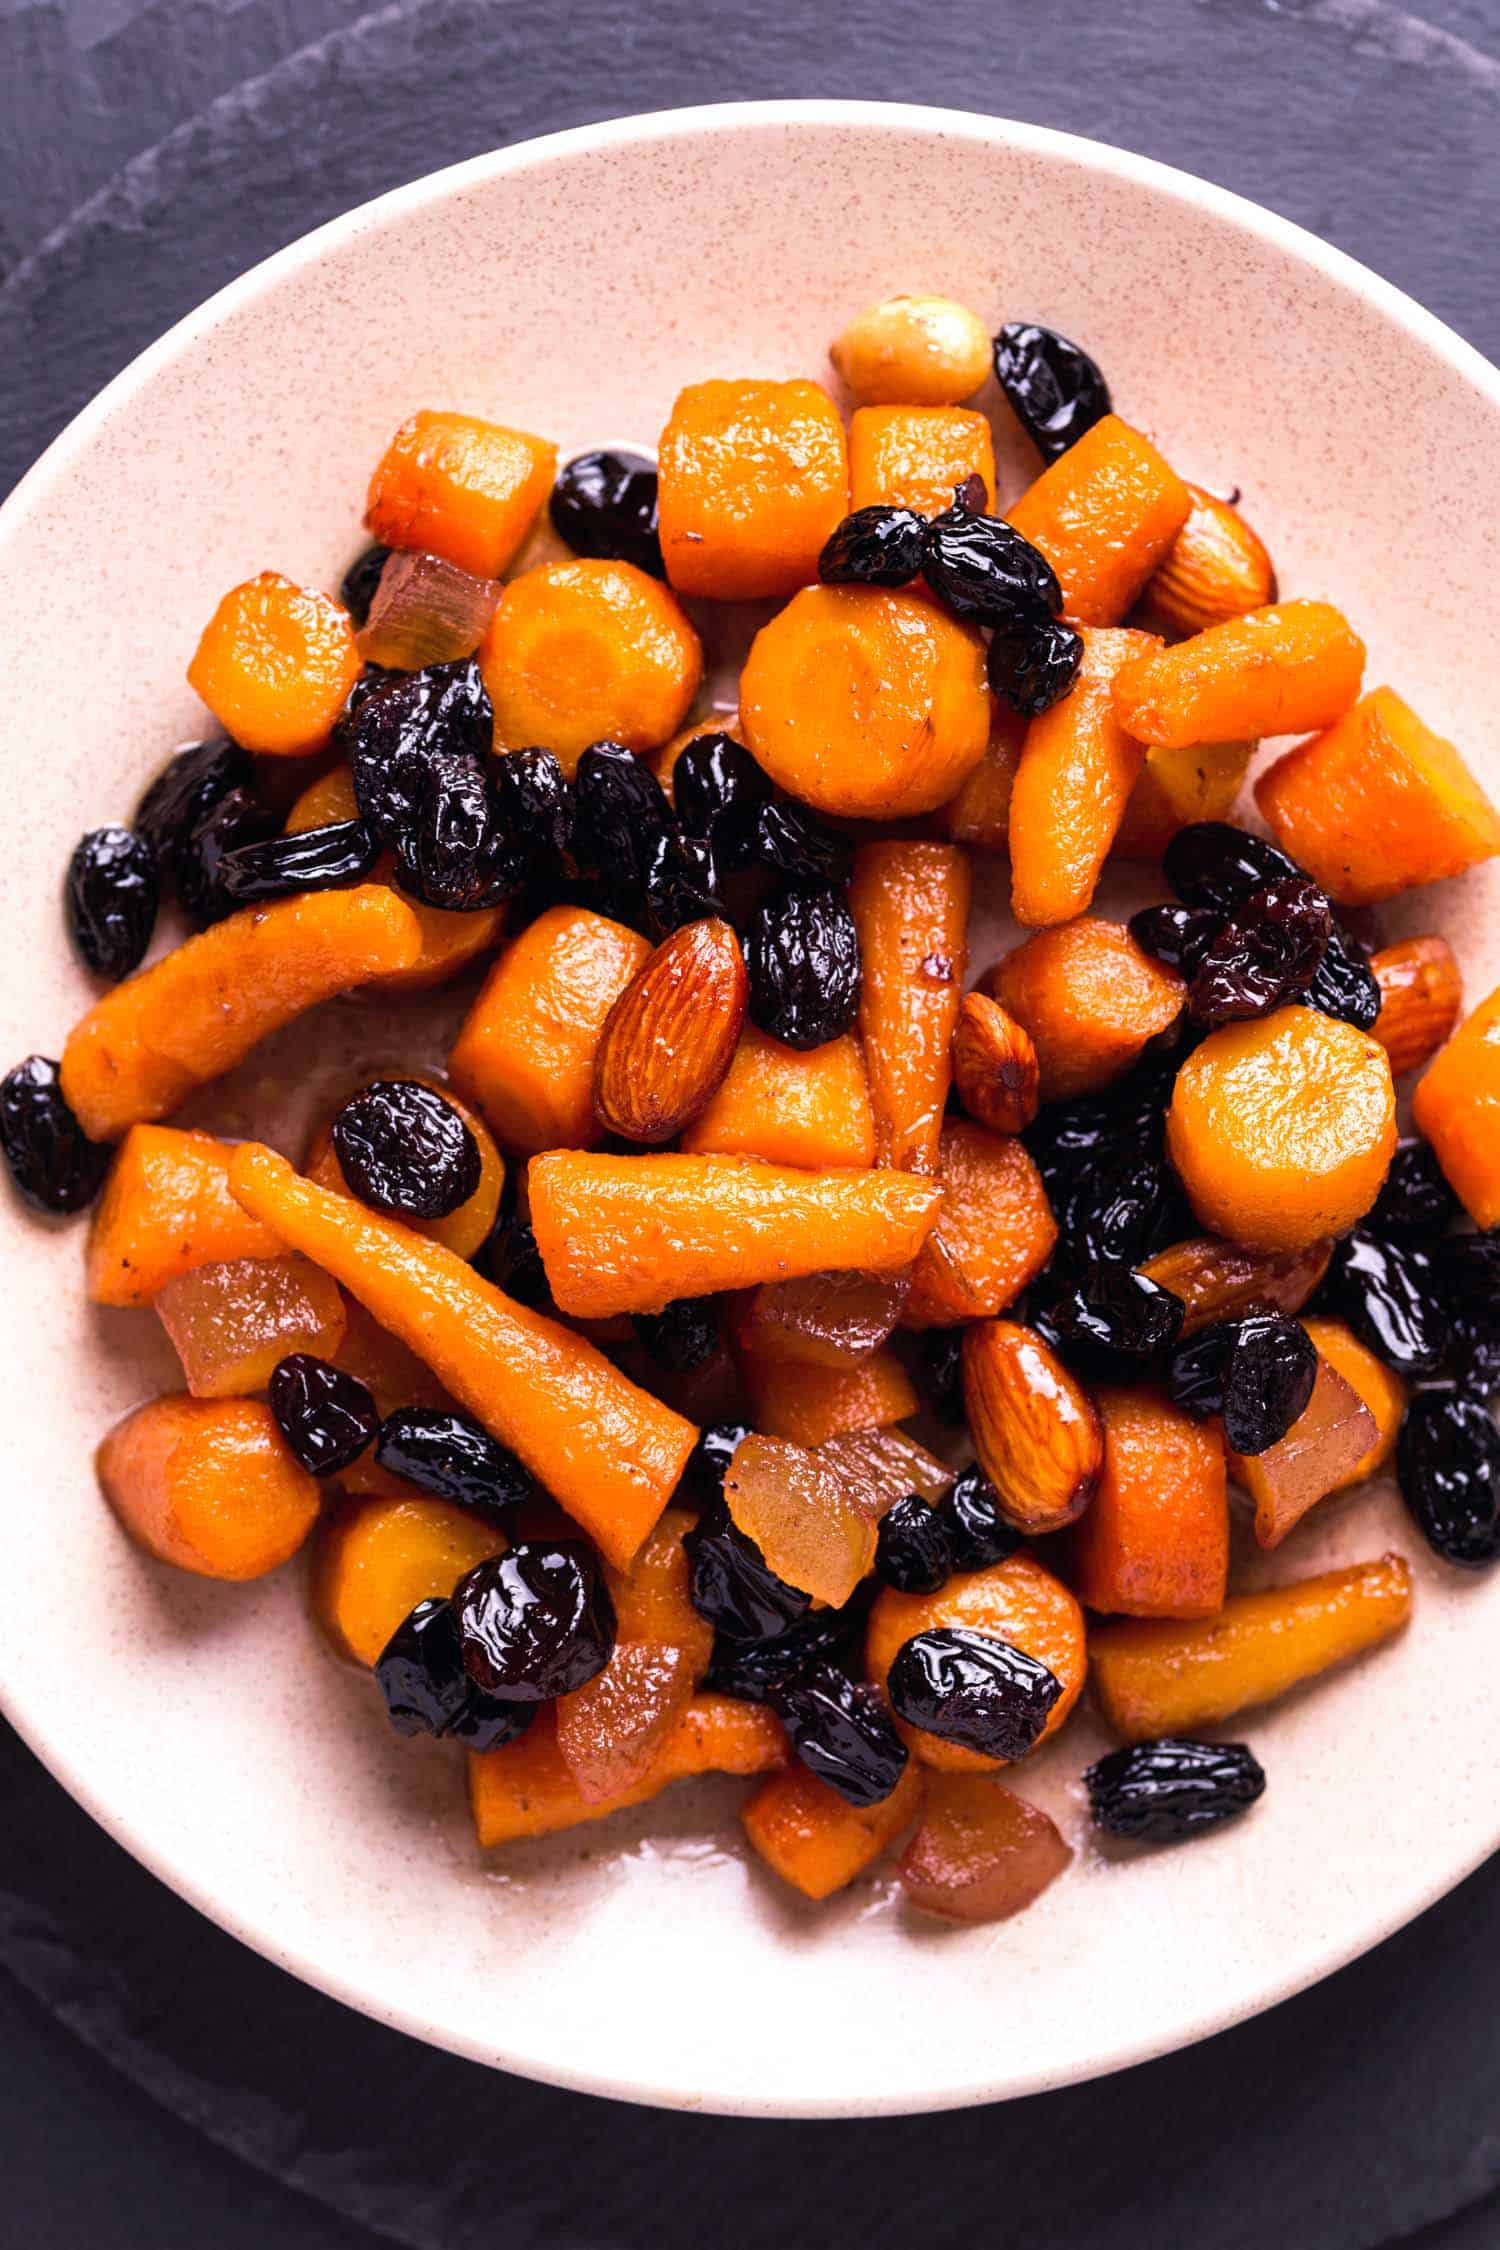 Jewish holiday food favourite tzimmes vegetarian dish with carrots, almonds and raisins